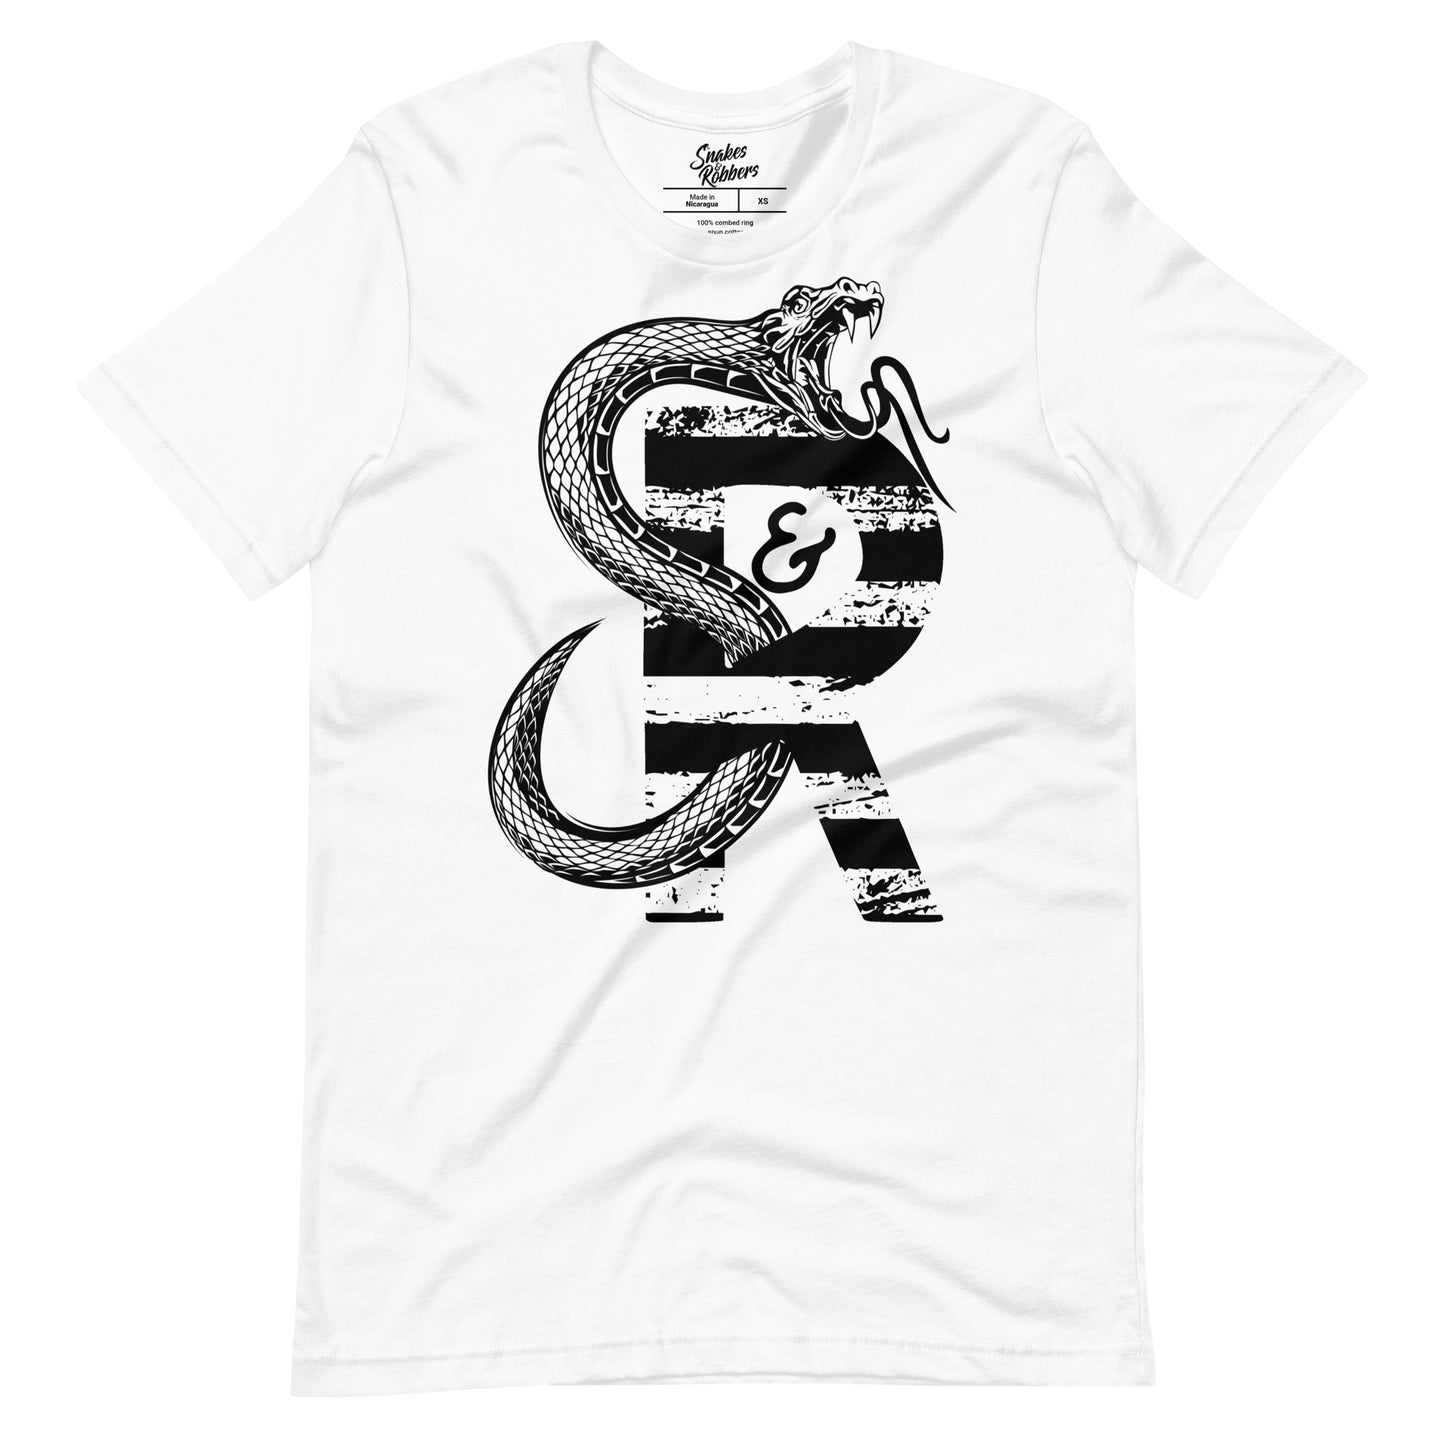 Snakes & Robbers Unisex Retail Fit T-Shirt